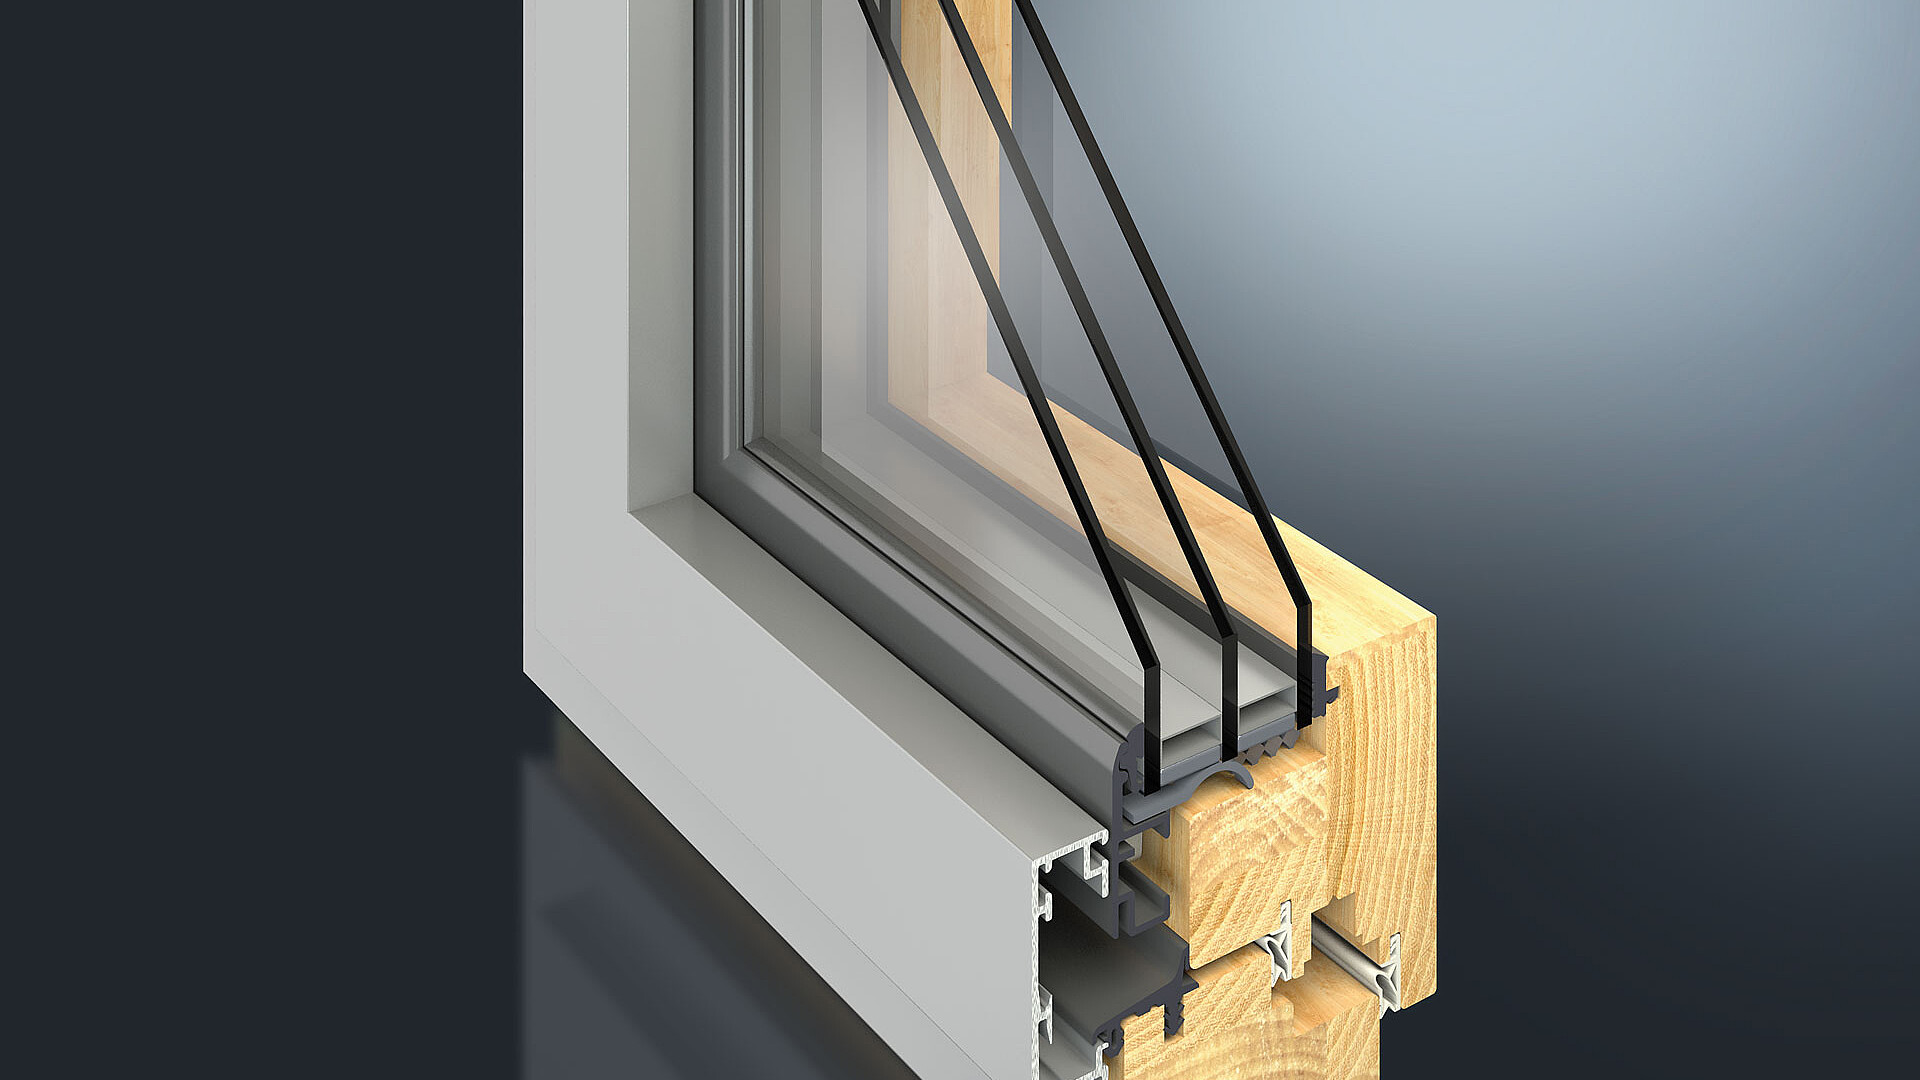 The reduced view width of 50 mm offers a whole new range of options in terms of technology and appearance. The GUTMANN MIRA contour integral 50 window system has slim frame facings with a half-concealed sash.